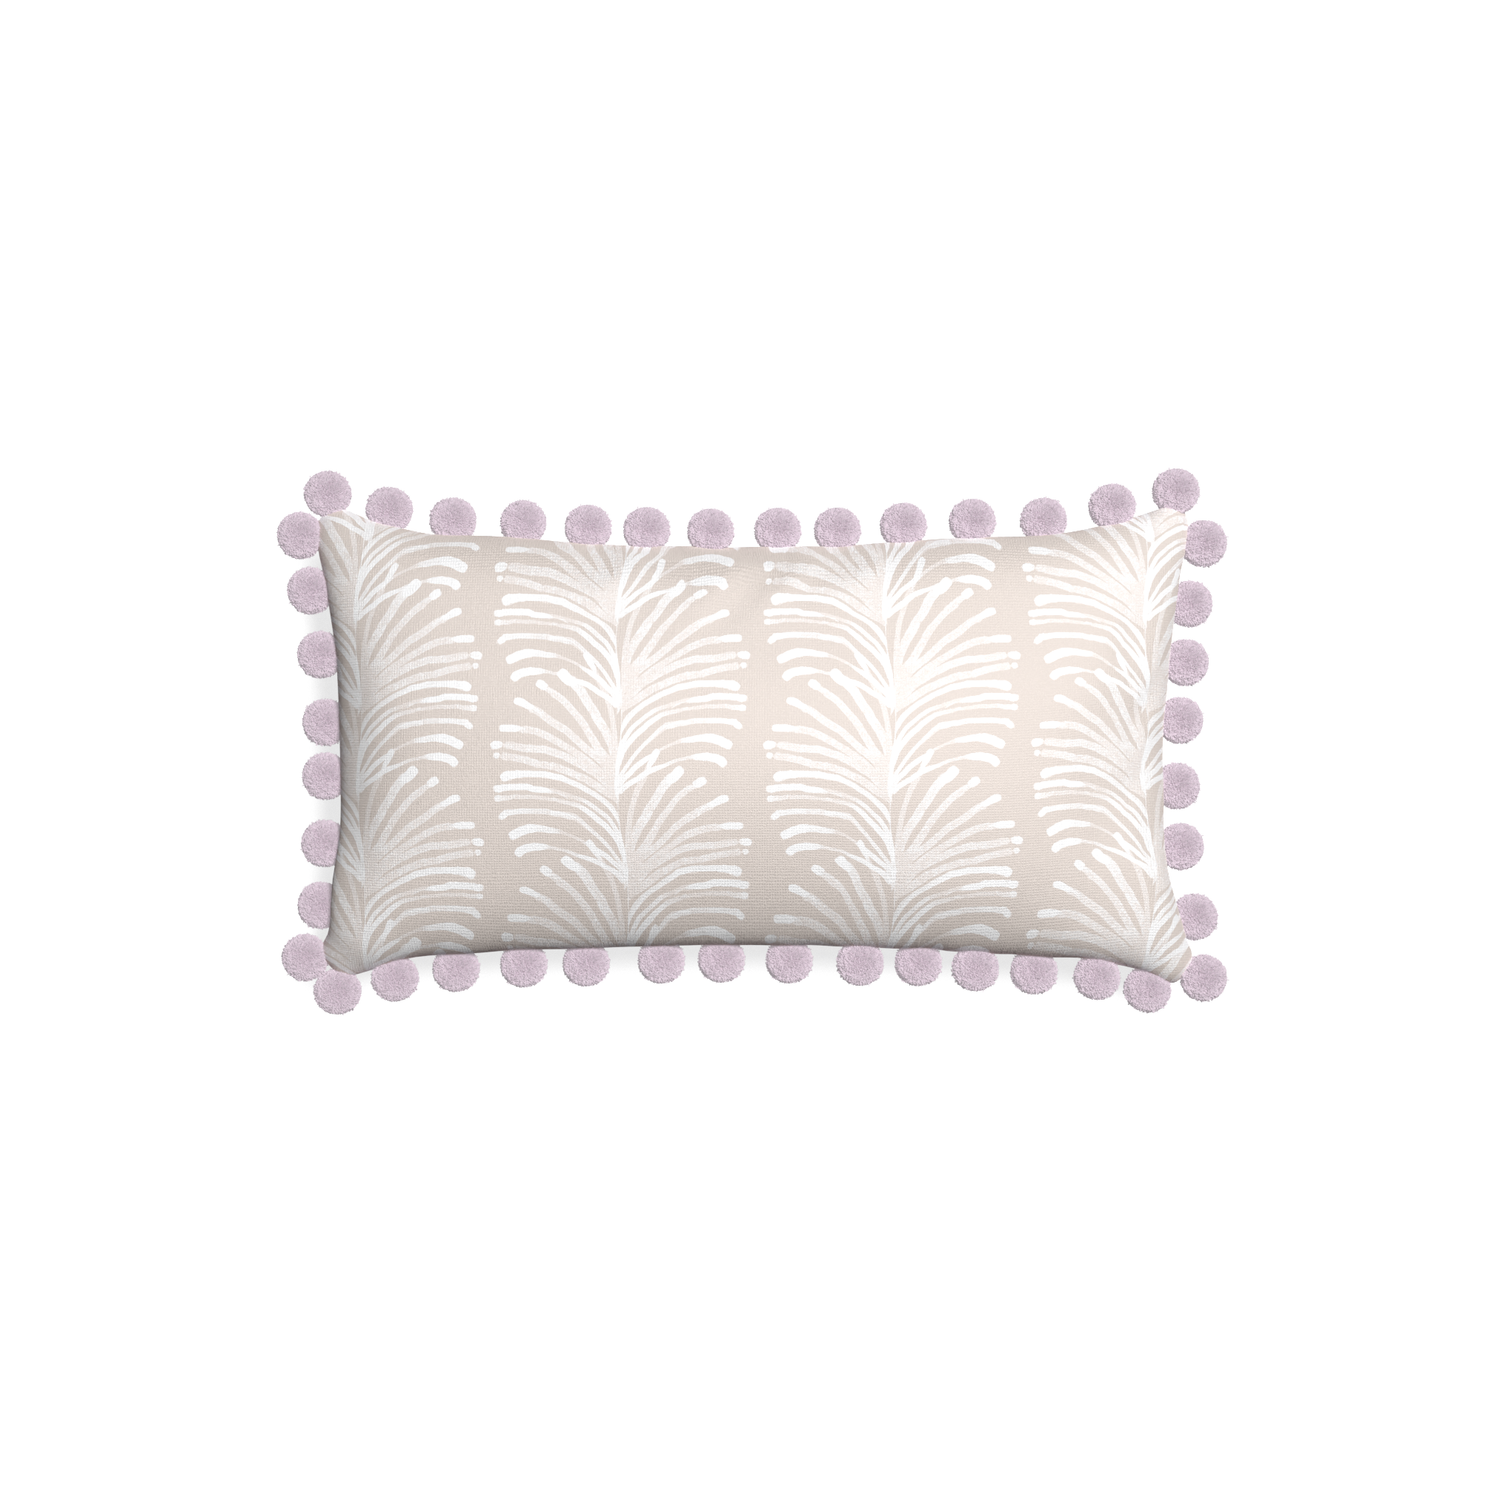 Petite-lumbar emma sand custom sand colored botanical stripepillow with l on white background